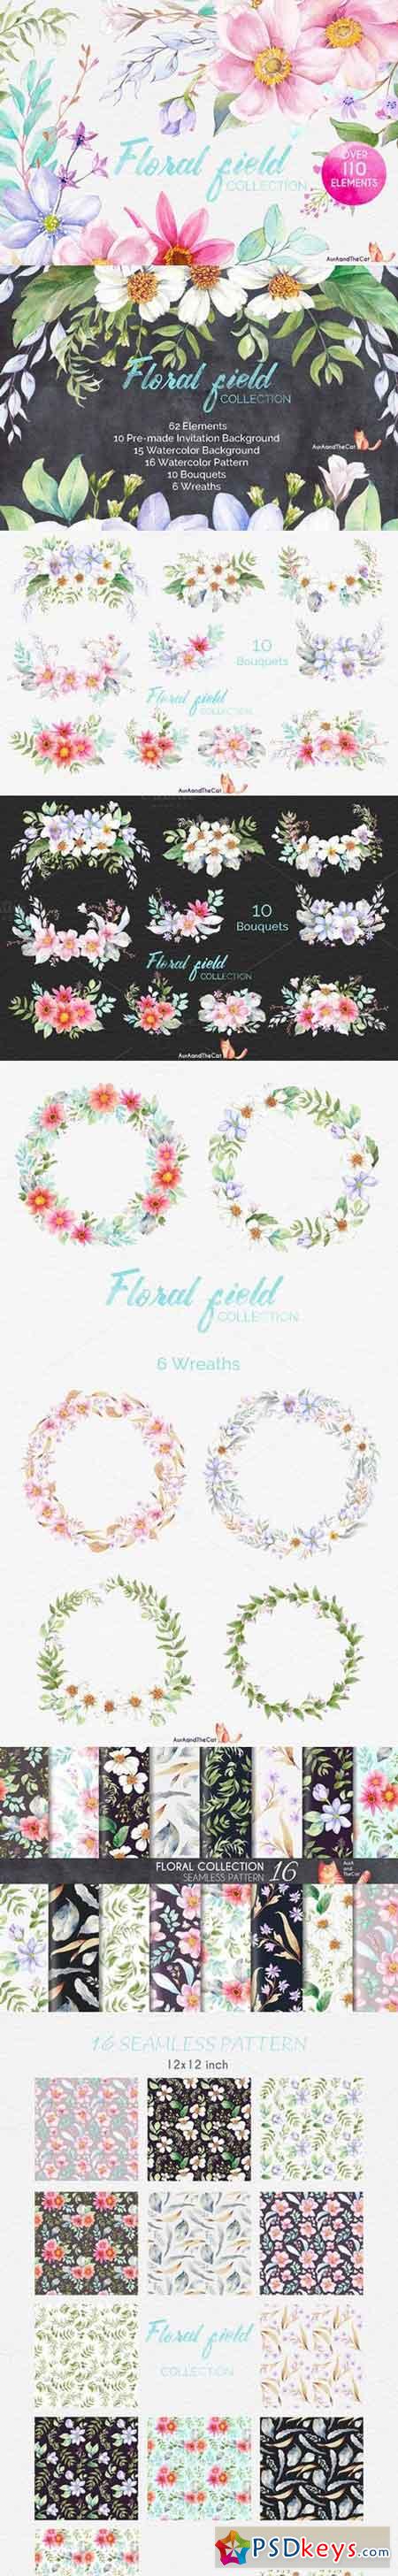 FLORAL FIELD collection 906511